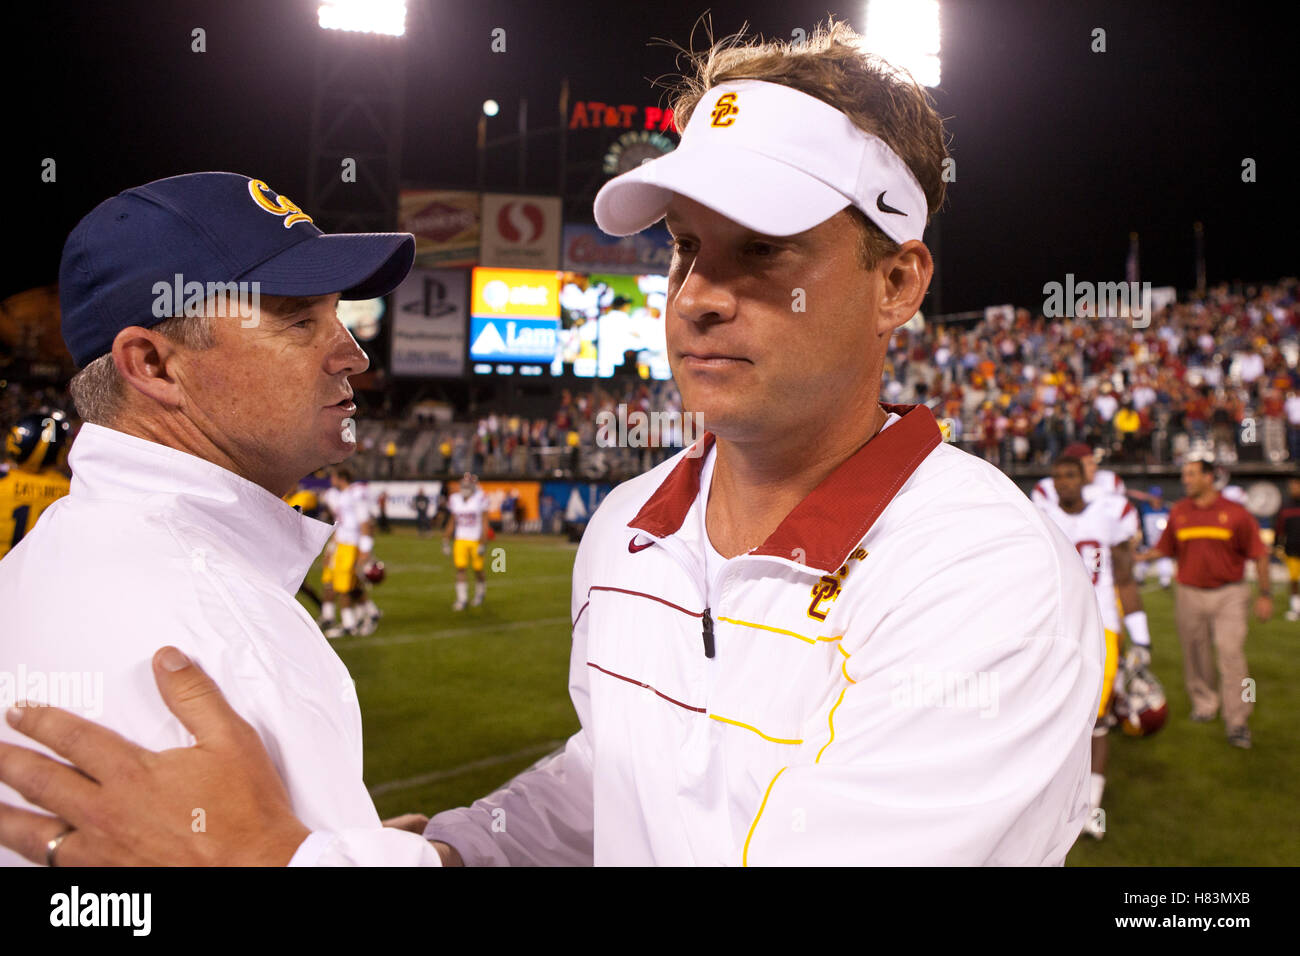 Oct 13, 2011; San Francisco CA, USA;  Southern California Trojans head coach Lane Kiffin (right) shakes hands with California Golden Bears head coach Jeff Tedford (left) after the game at AT&T Park.  Southern California defeated California 30-9. Stock Photo